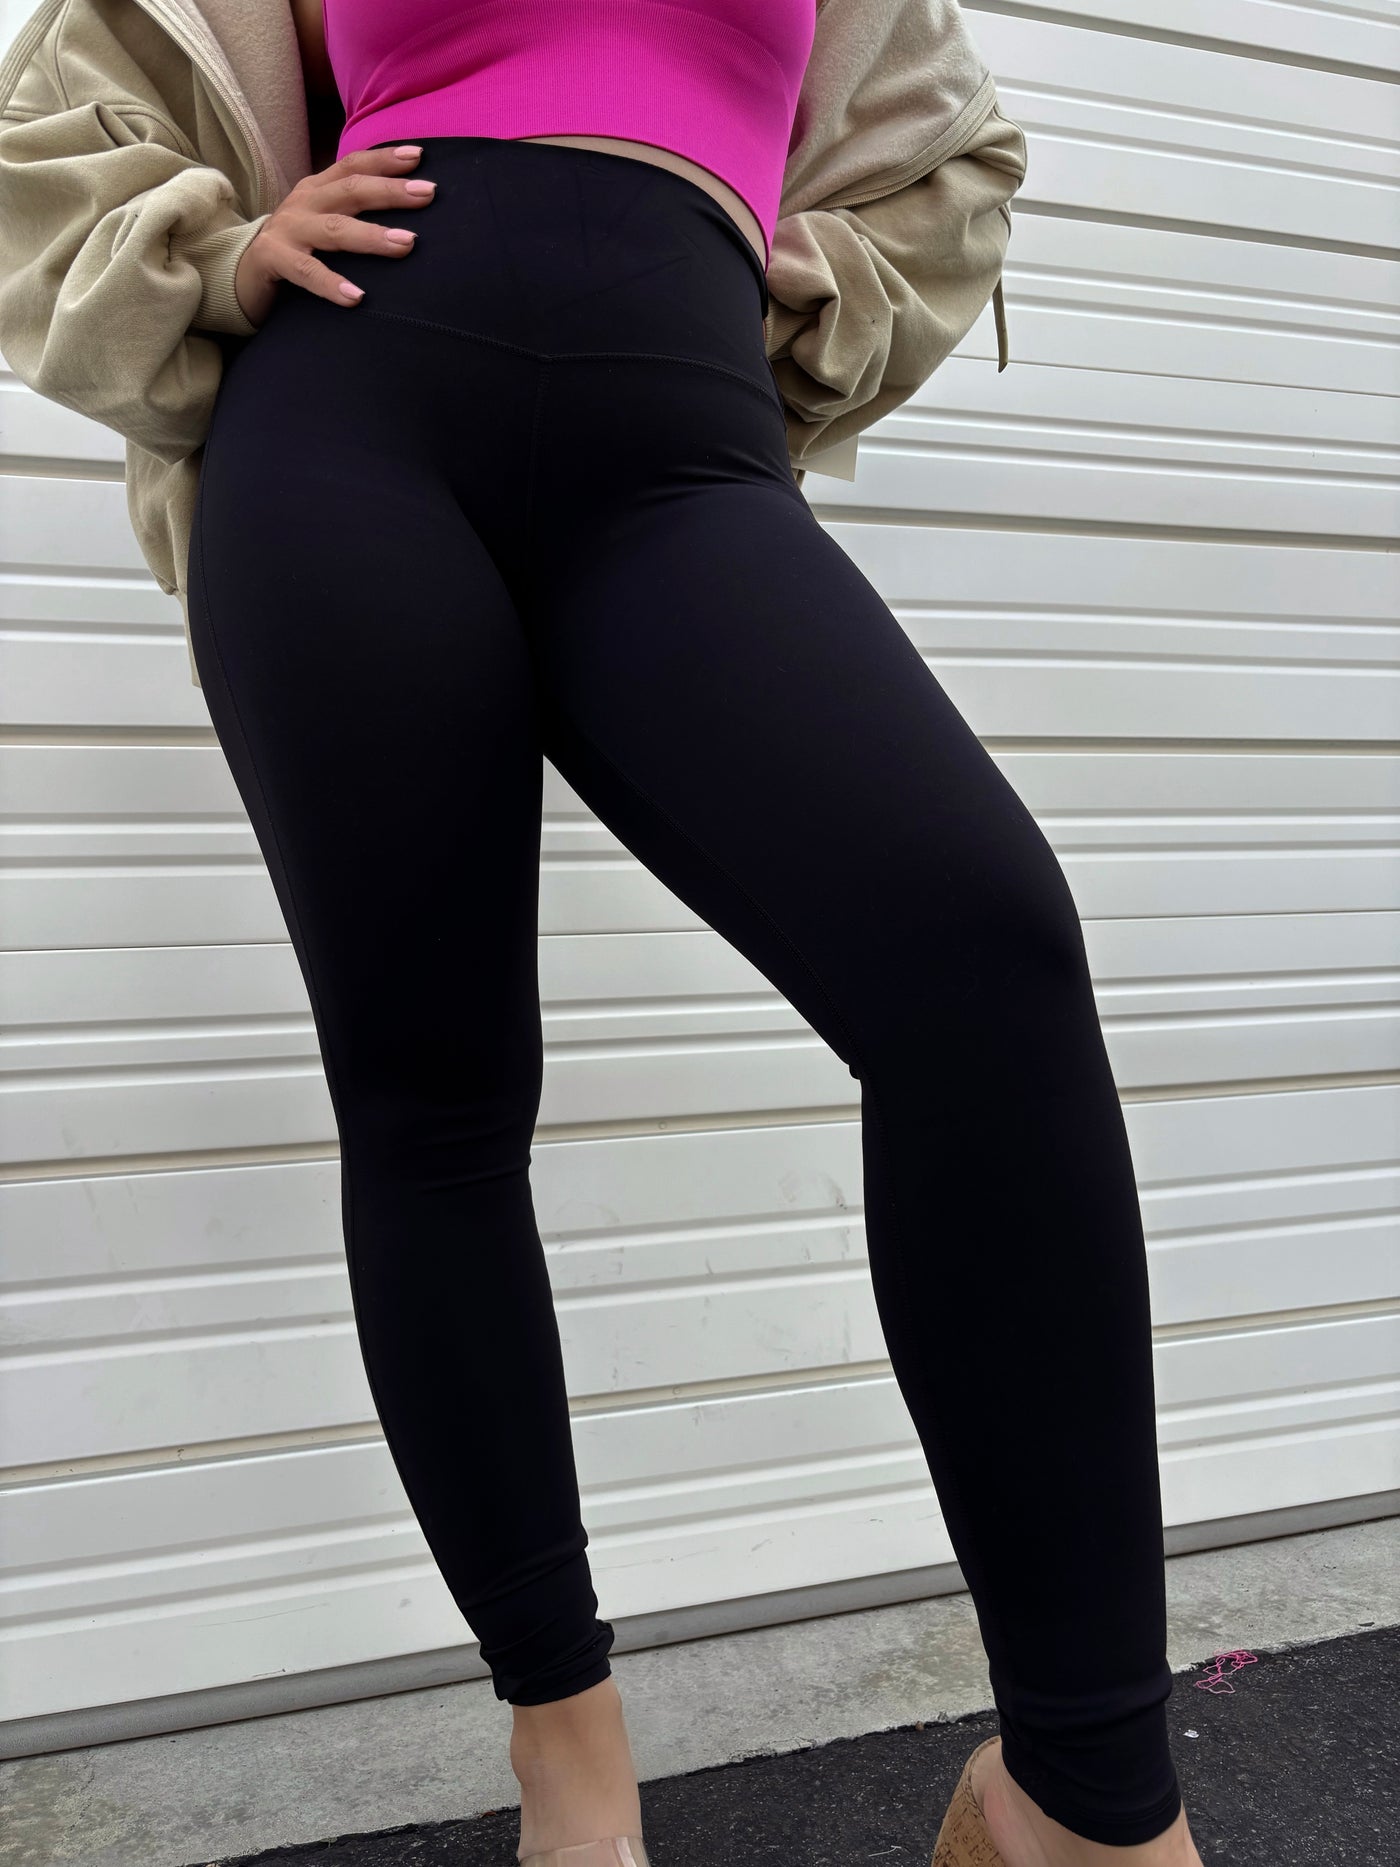 Personal Power - Stirrup High Waisted Leggings